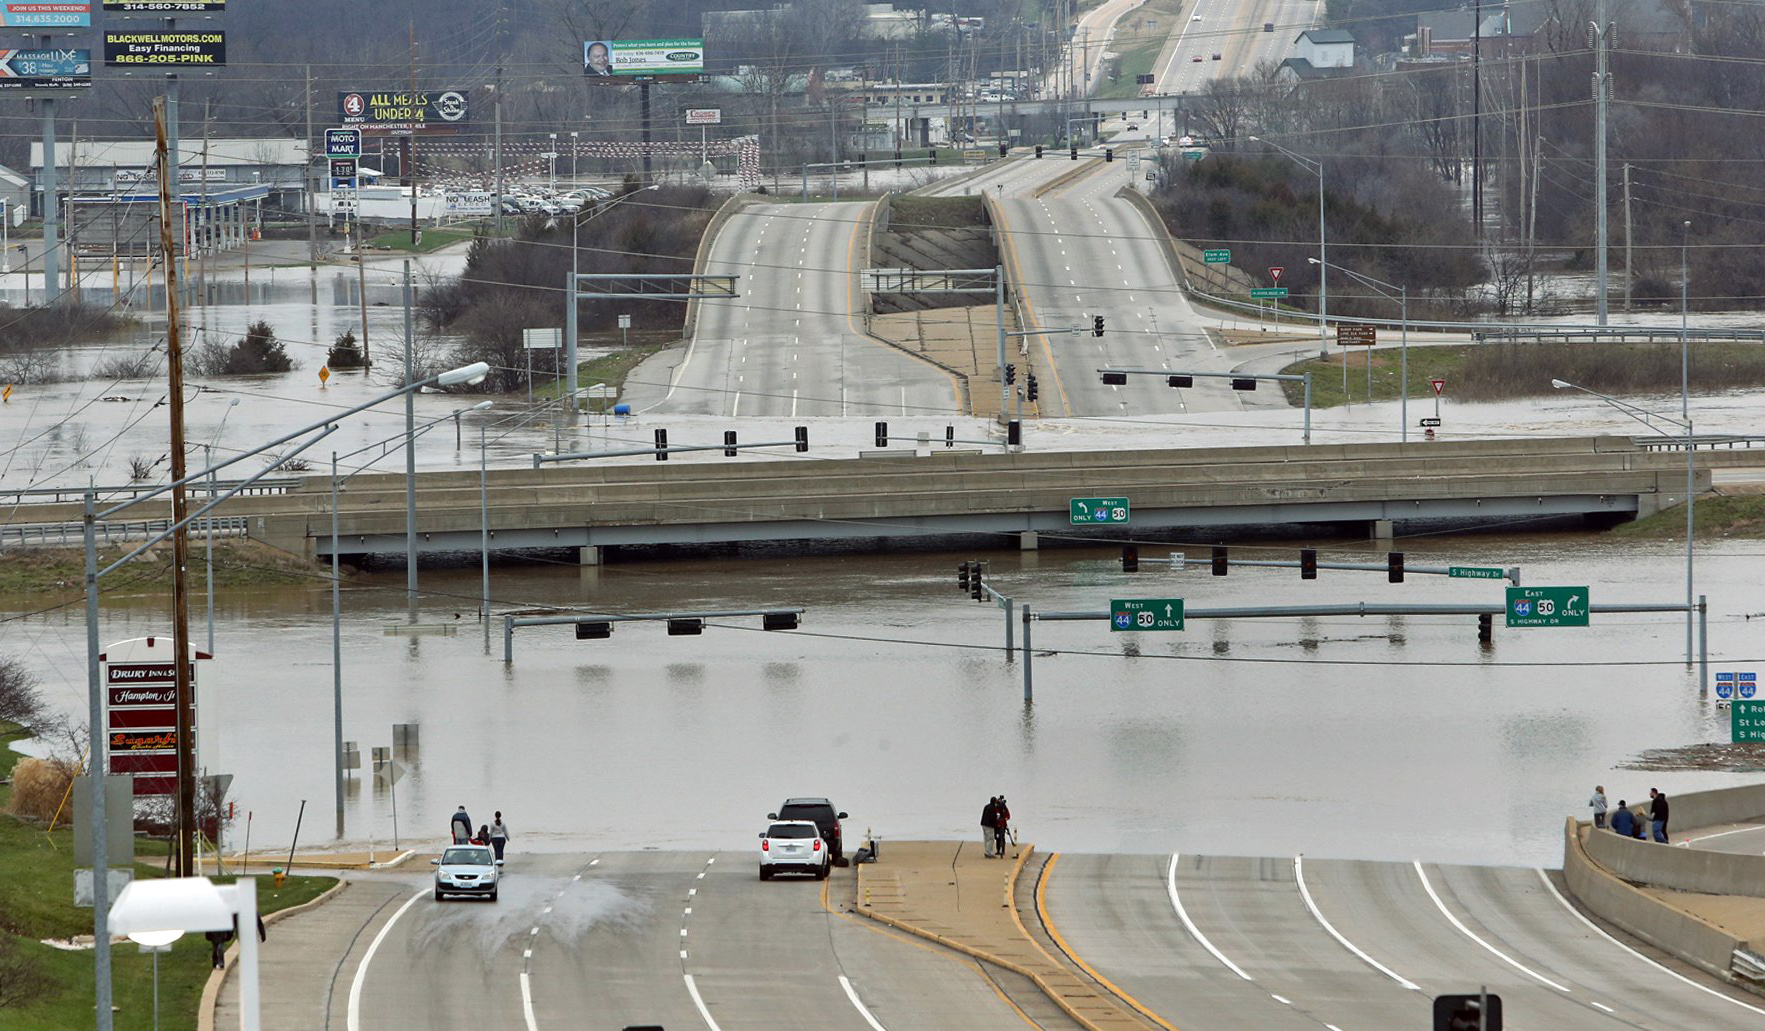 St. Louis - Flooding Forcing Evacuations, Traffic Troubles In Missouri